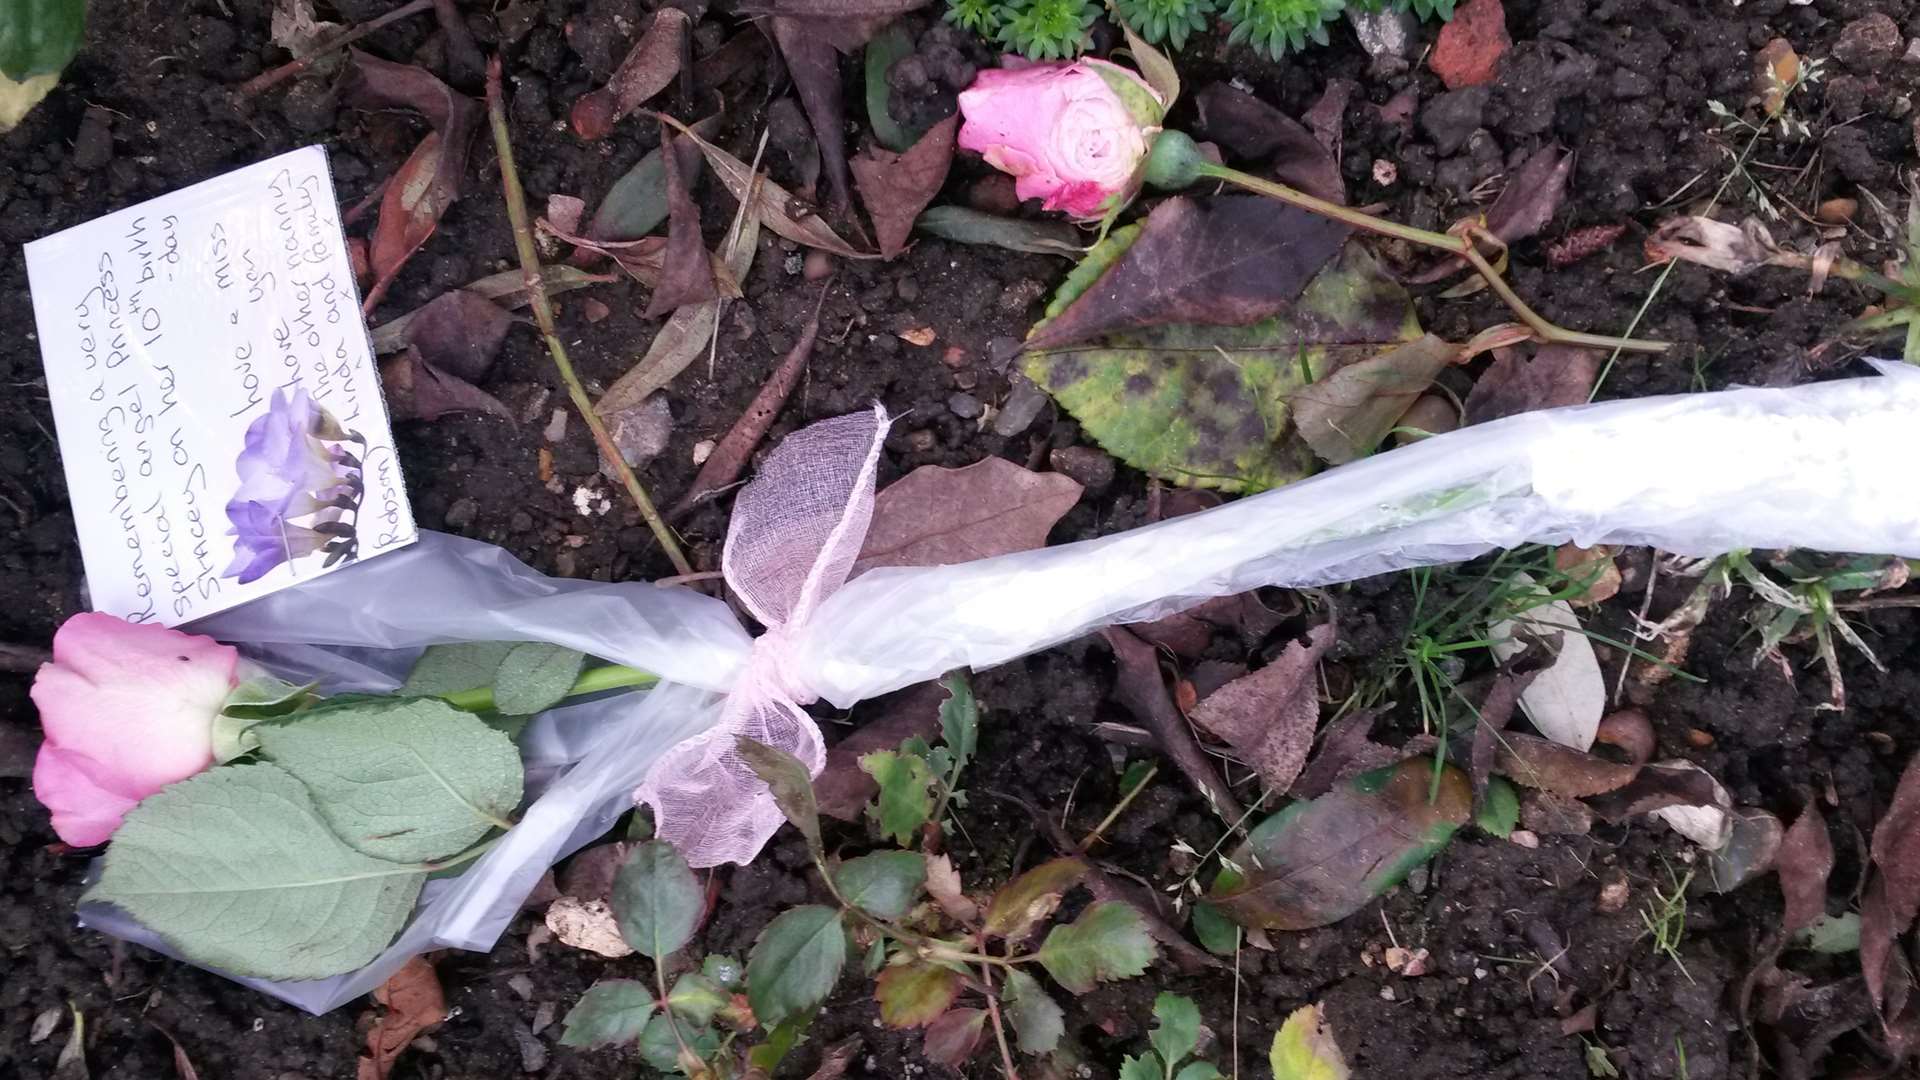 A single pink rose, Stacey's favourite, from actress Linda Robson was among the floral tributes